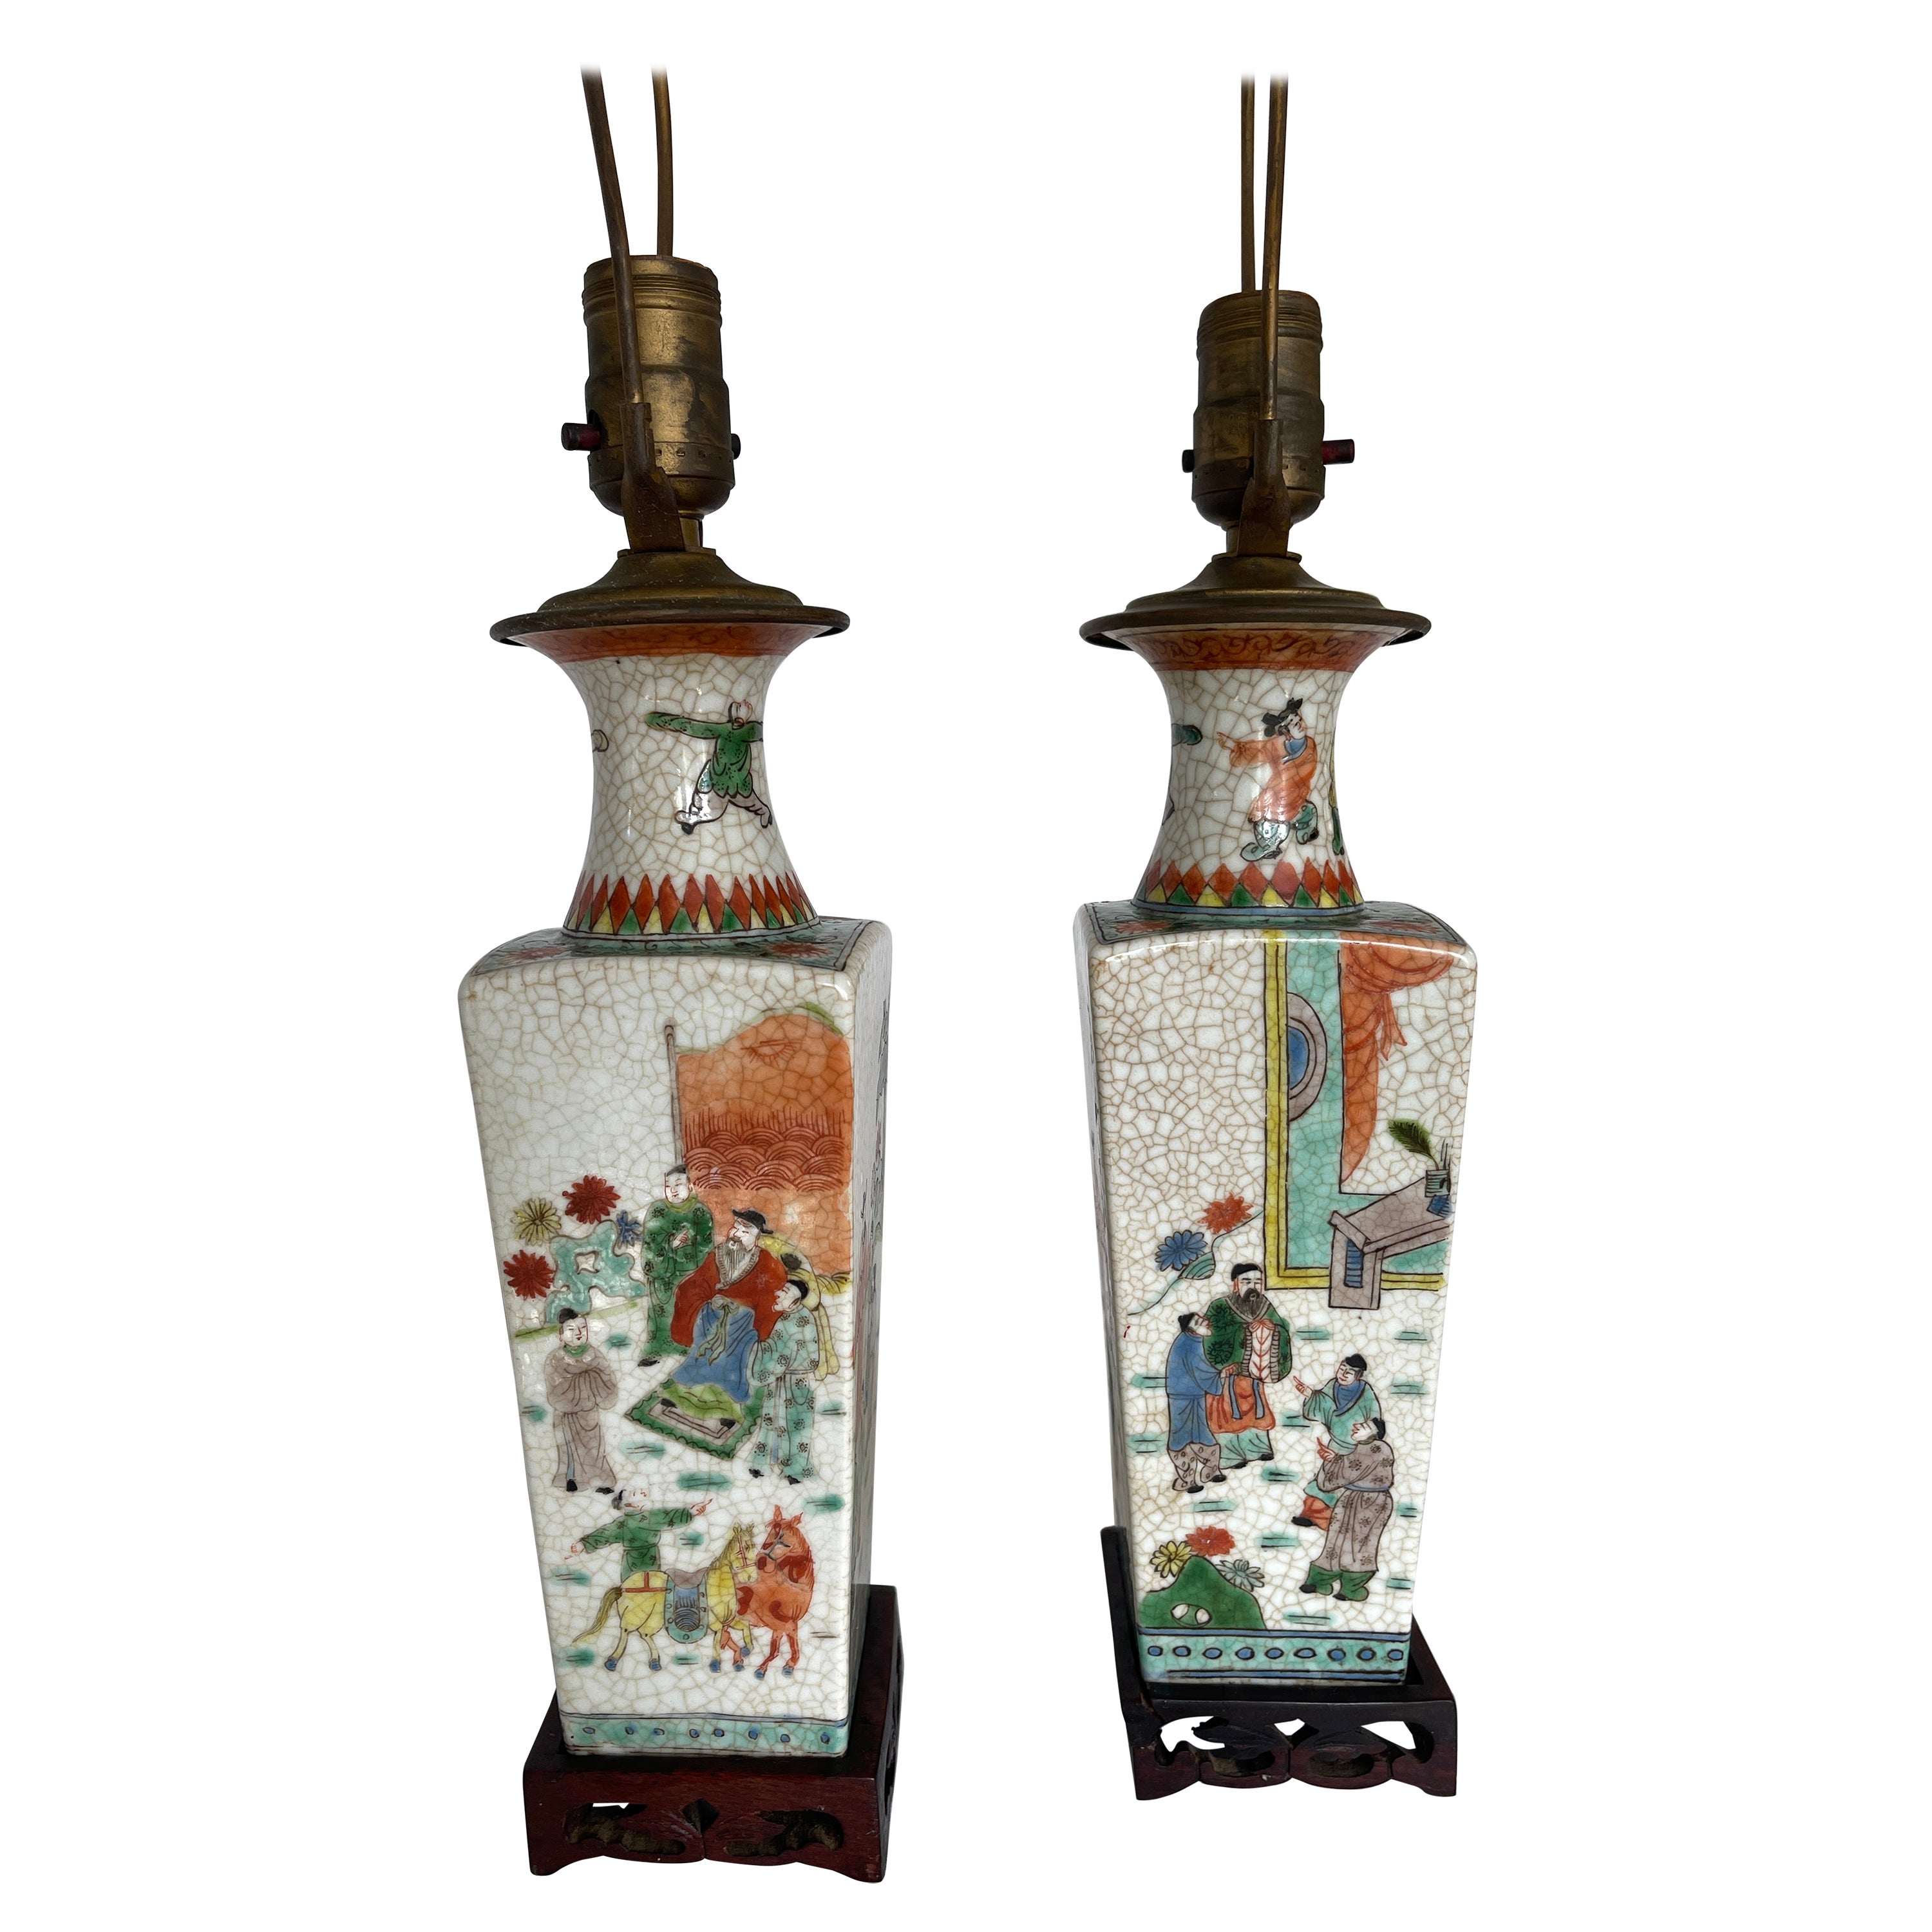 Pair of 19th Century Chinese Export Crackle Ware Vase Lamps on Carved Wood Bases For Sale